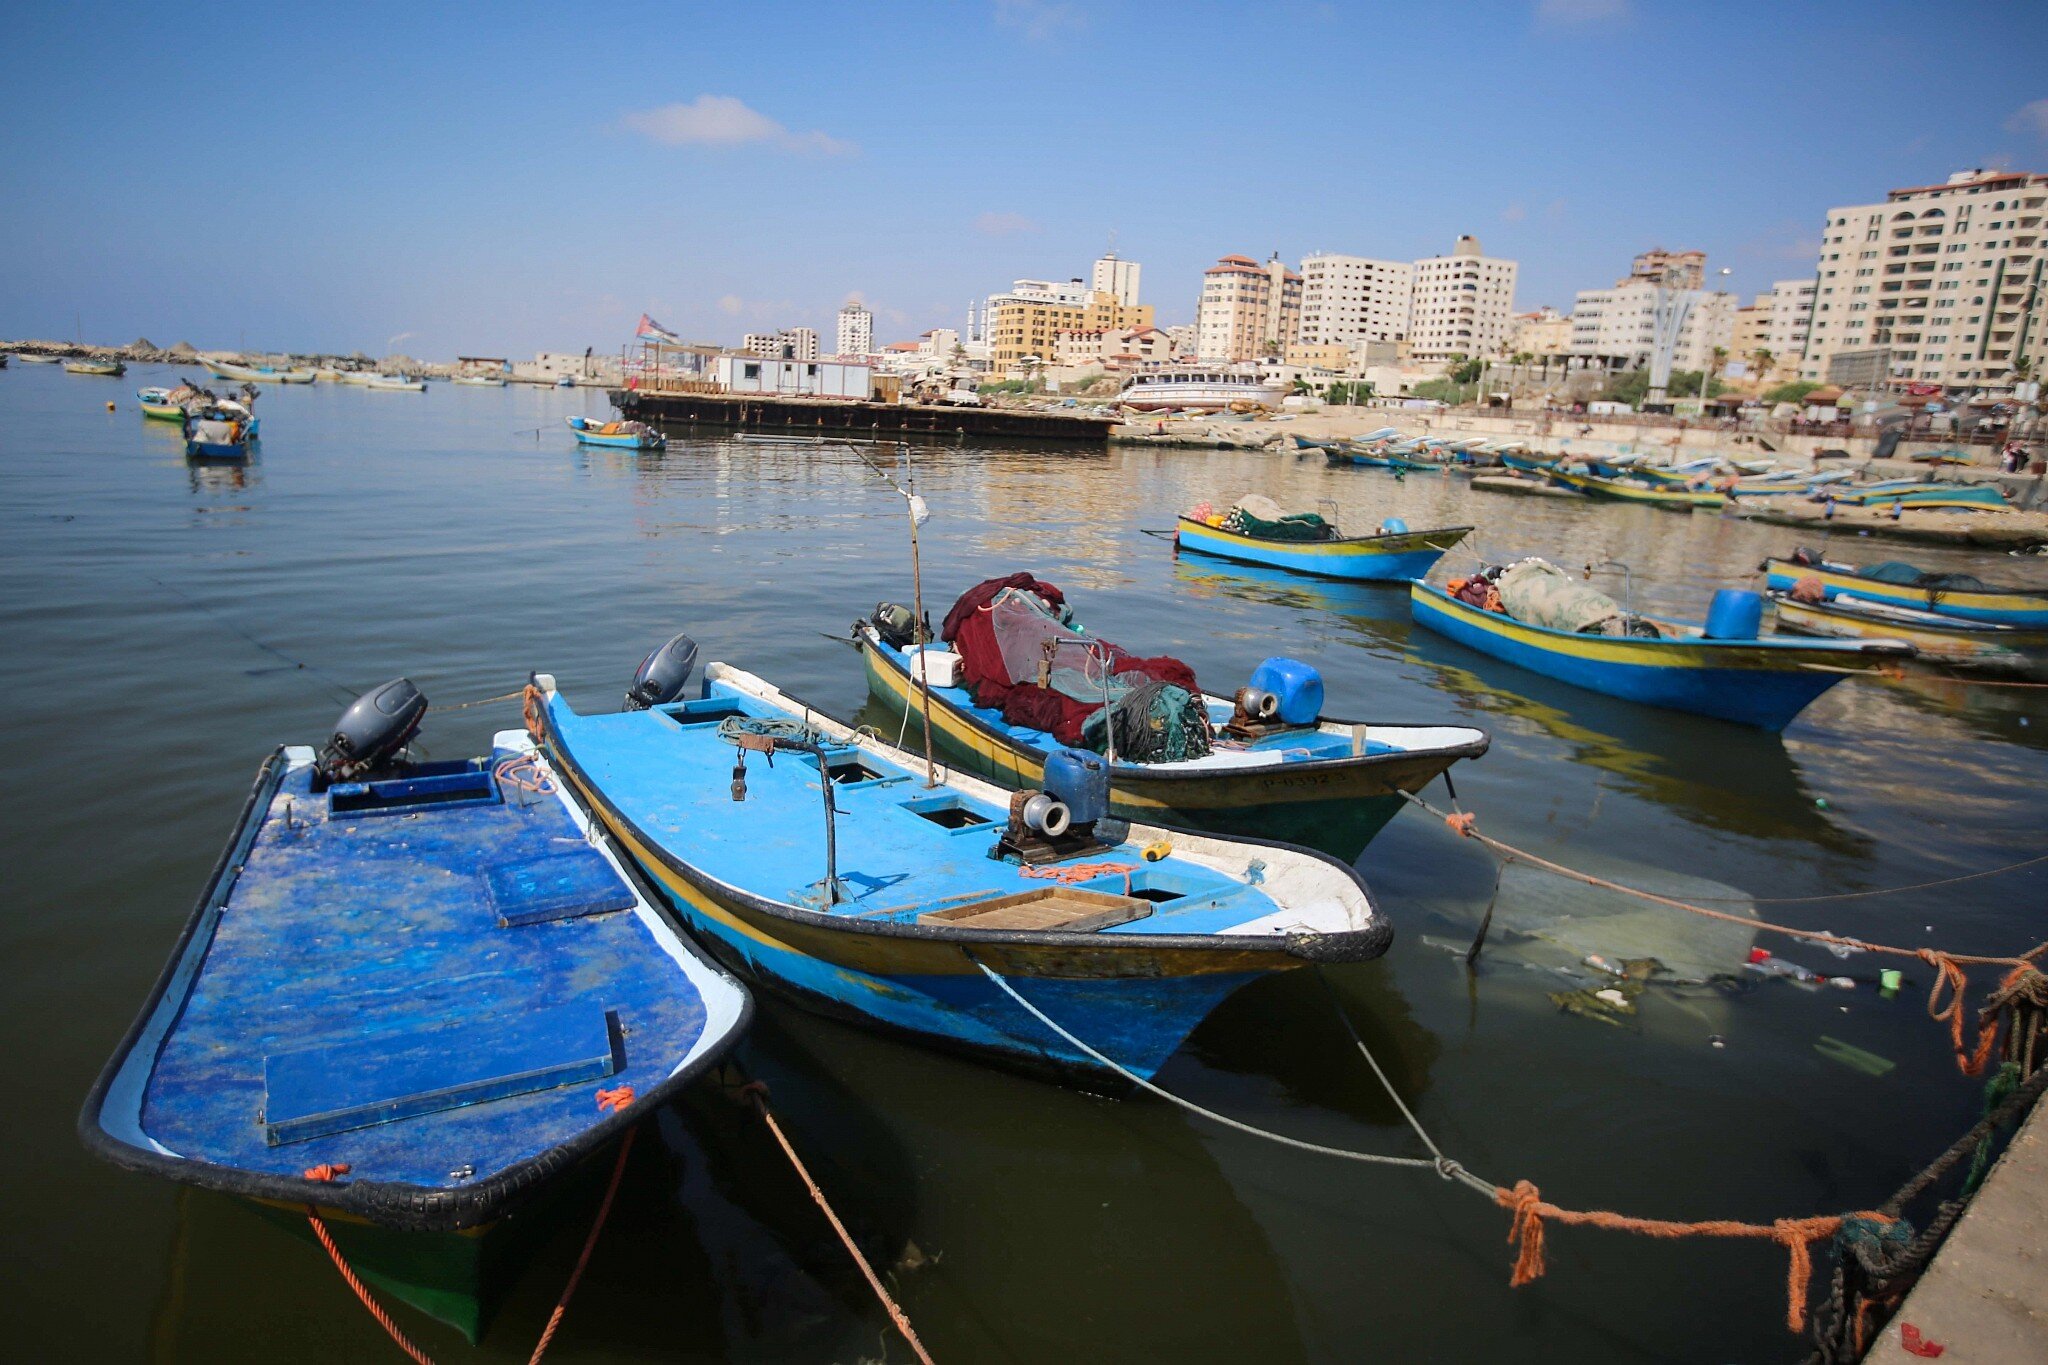 Fishing boats docked at the port of Gaza City, يونيو 13, 2019. (Hassan Jedi/Flash90).